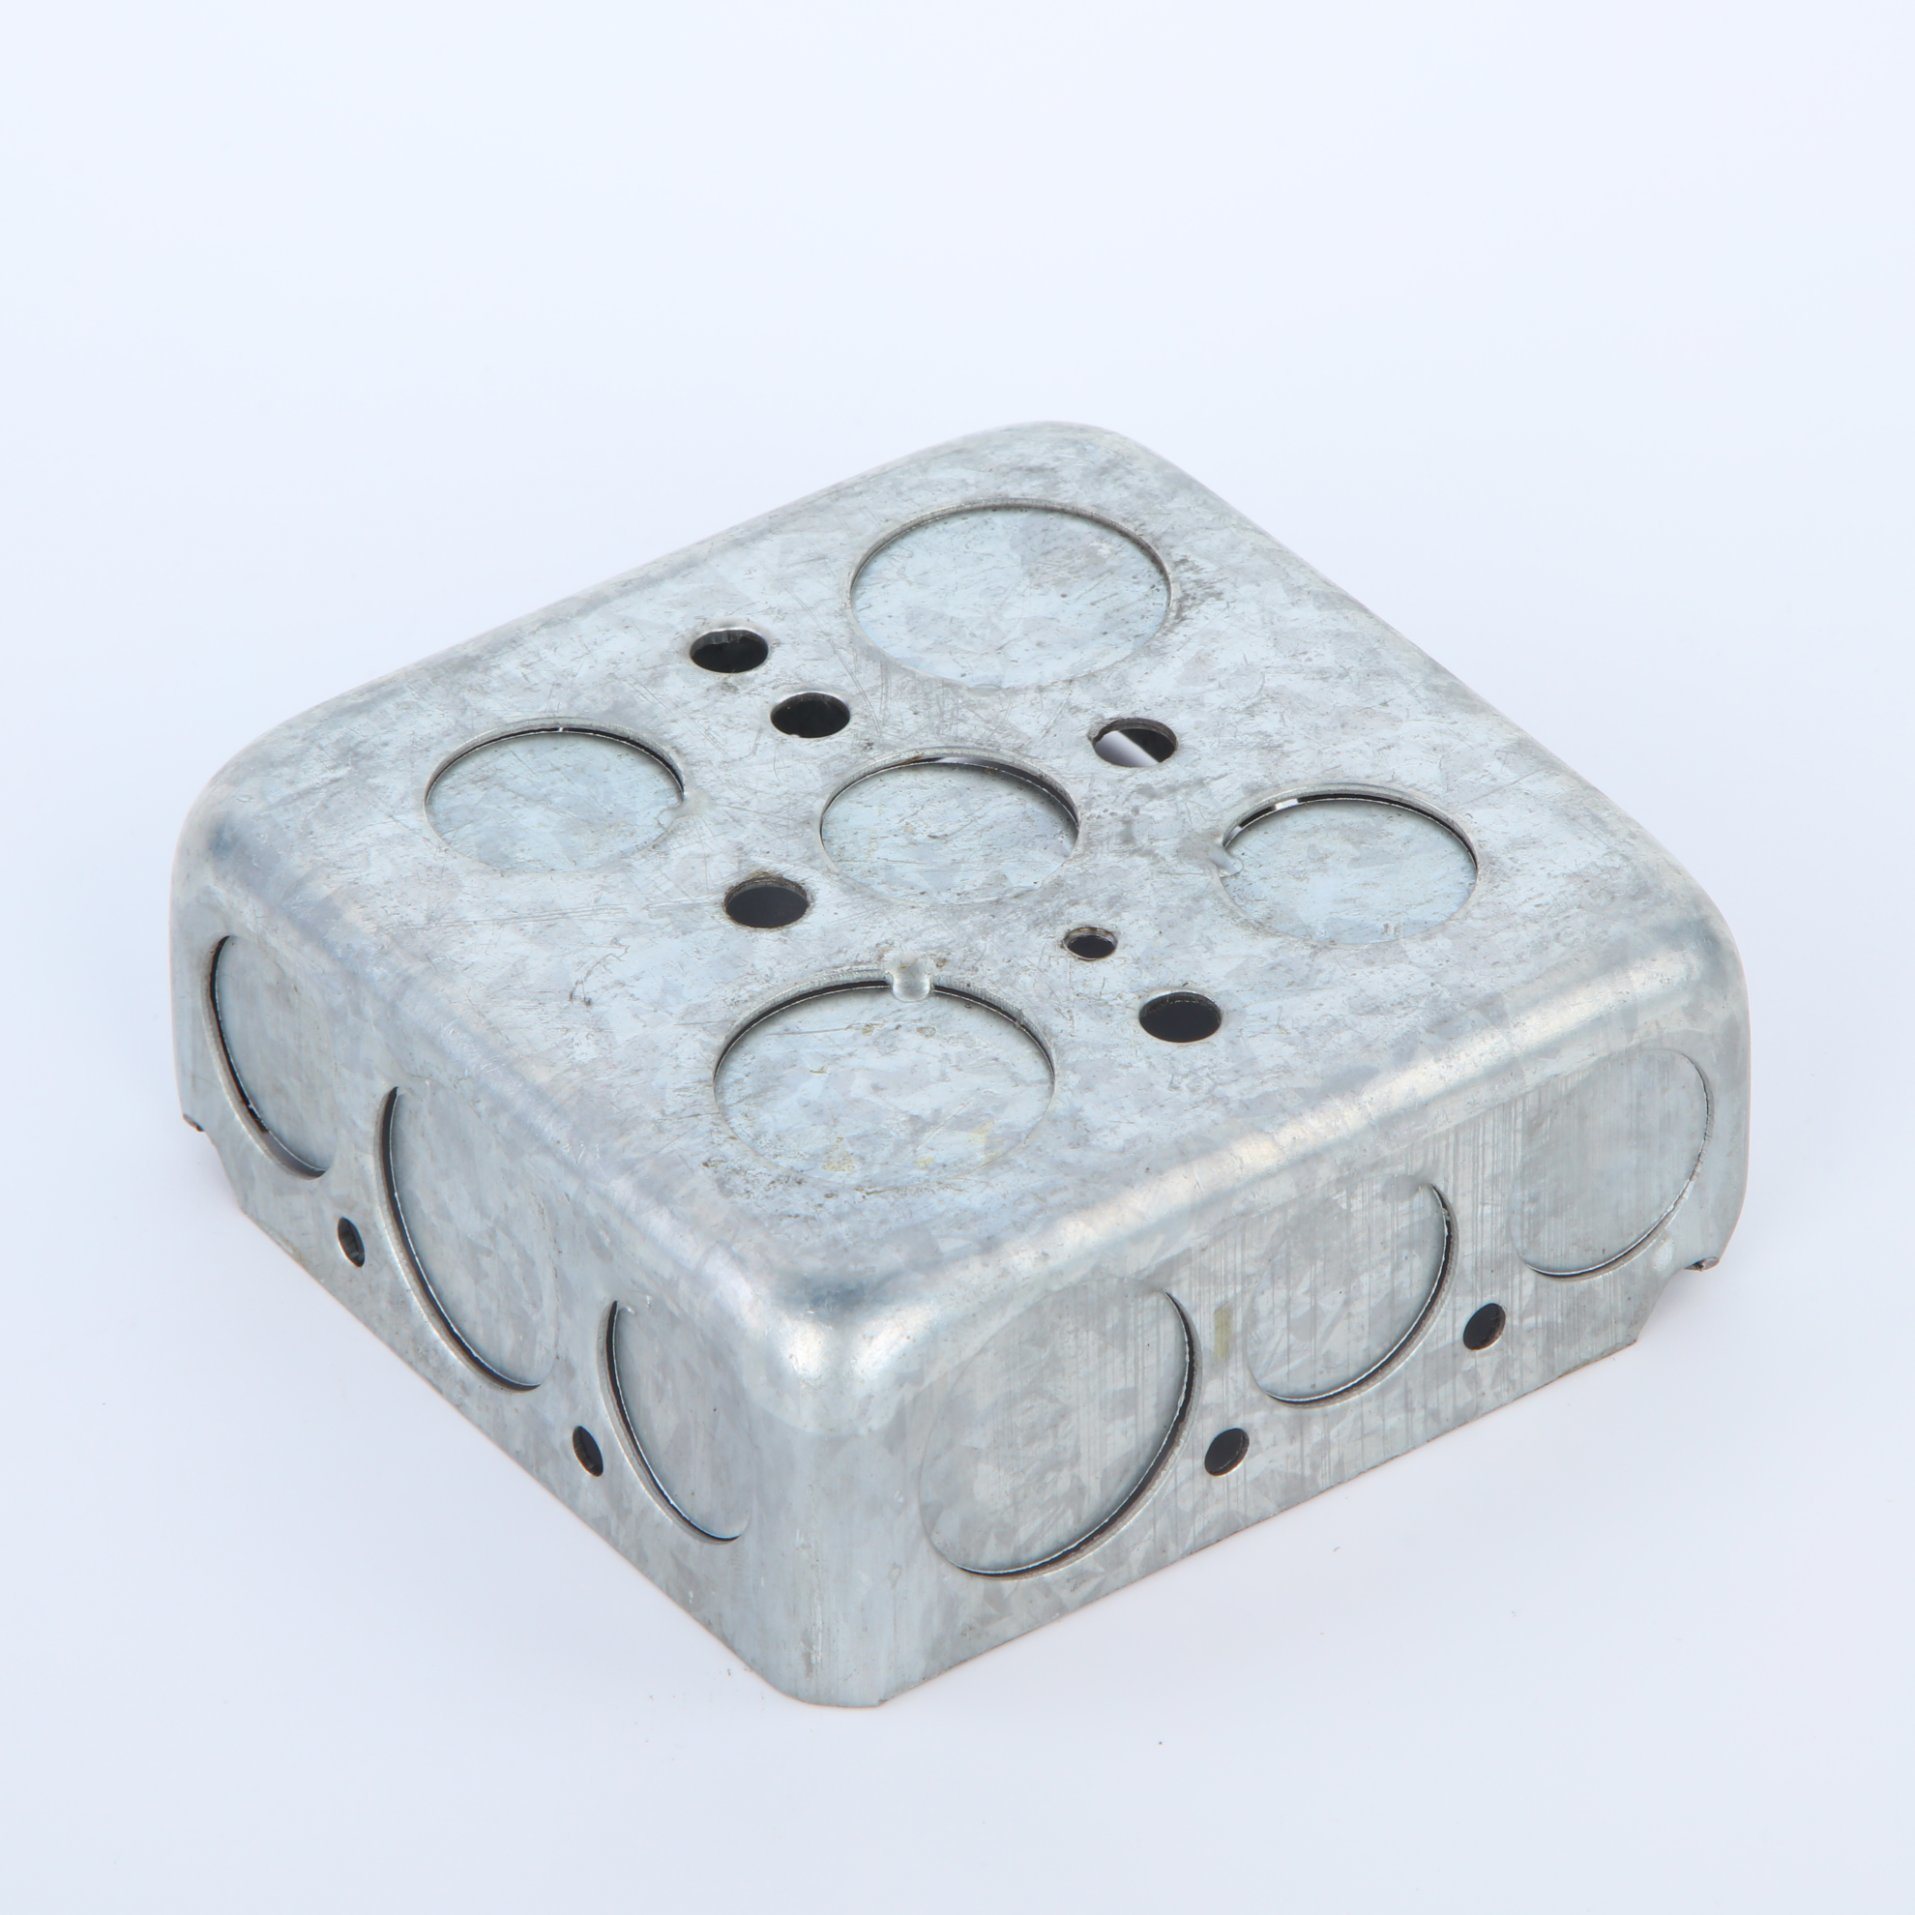 Steel Outlet Box Octagon UL Listed 1-1/2" Depth